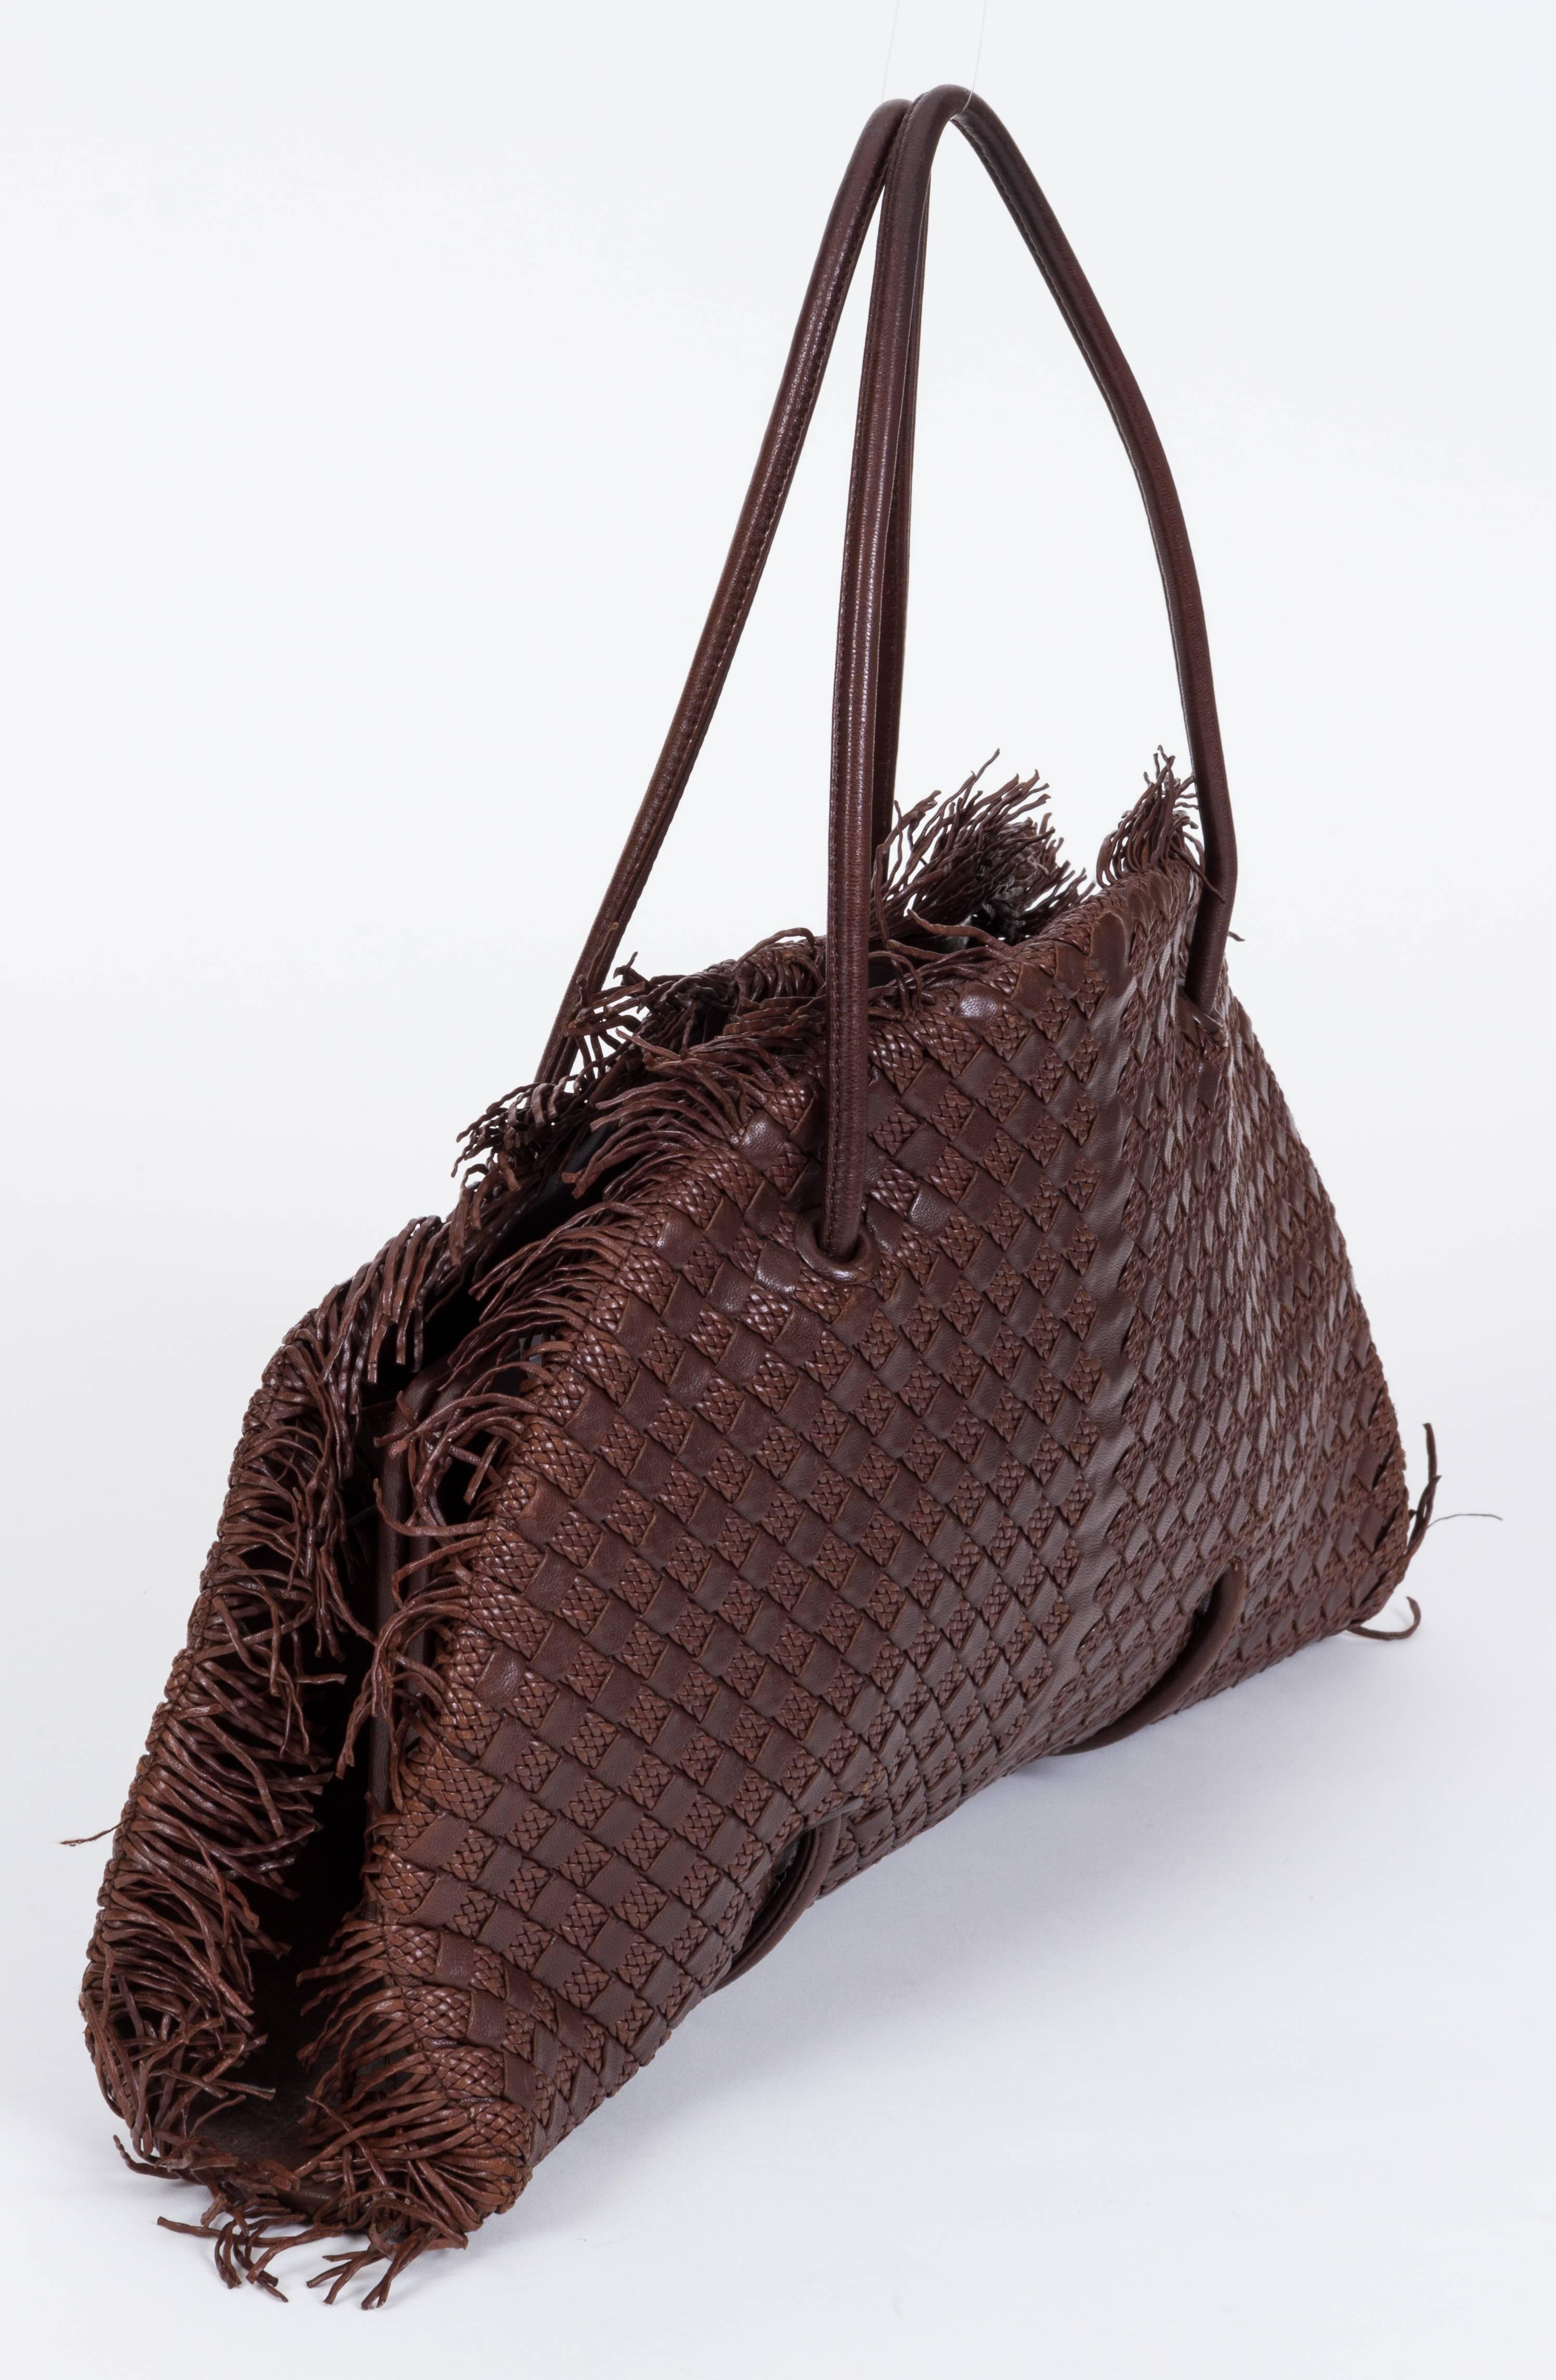 Bottega Veneta limited edition special woven intrecciato supple leather. Numbered item produced in Italy. Minor wear on corners and darkening on interior name plate. Measurements: 17